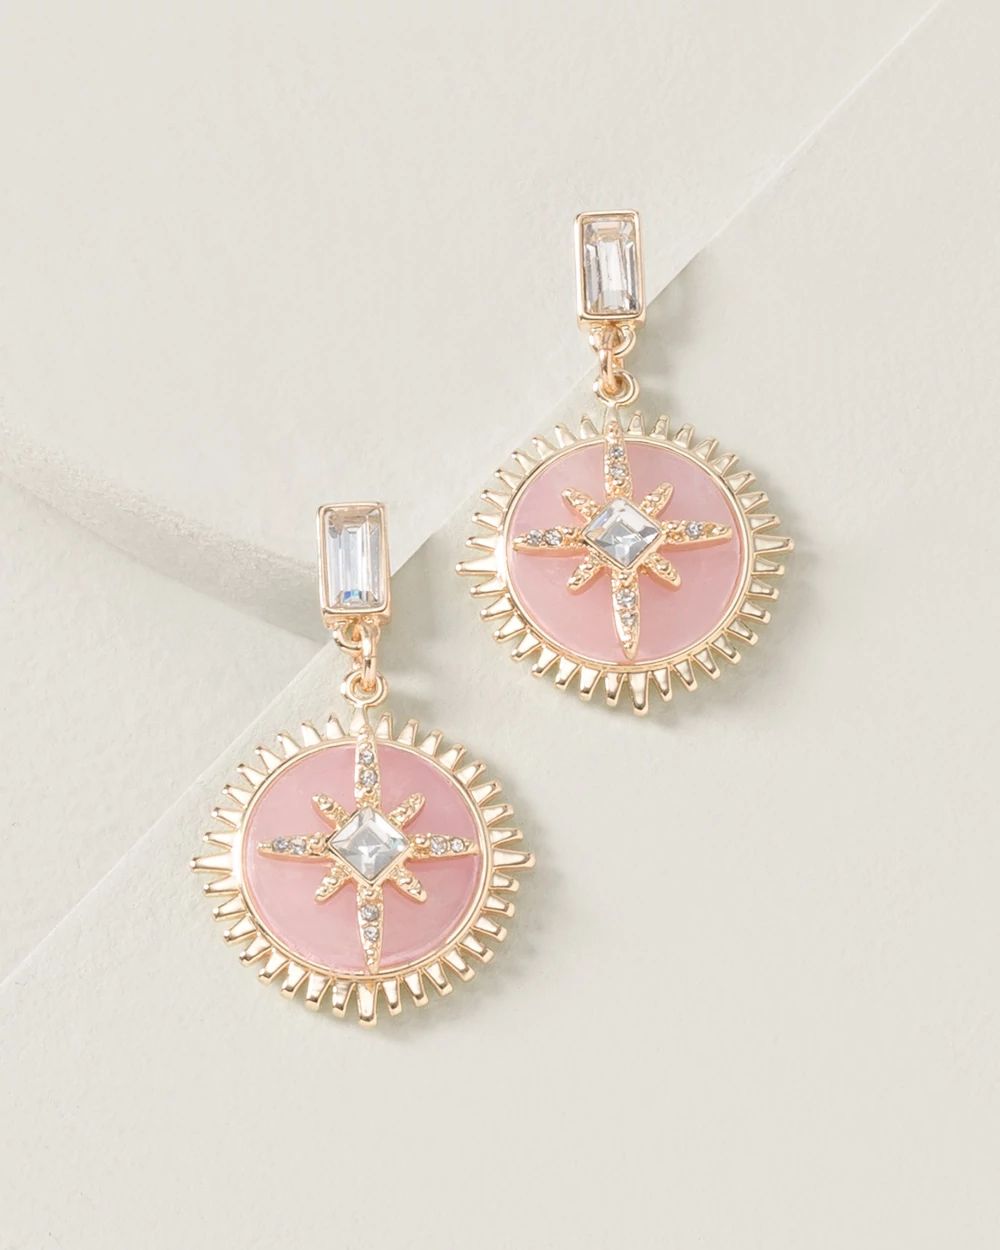 Goldtone Blush Celestial Drop Earrings click to view larger image.